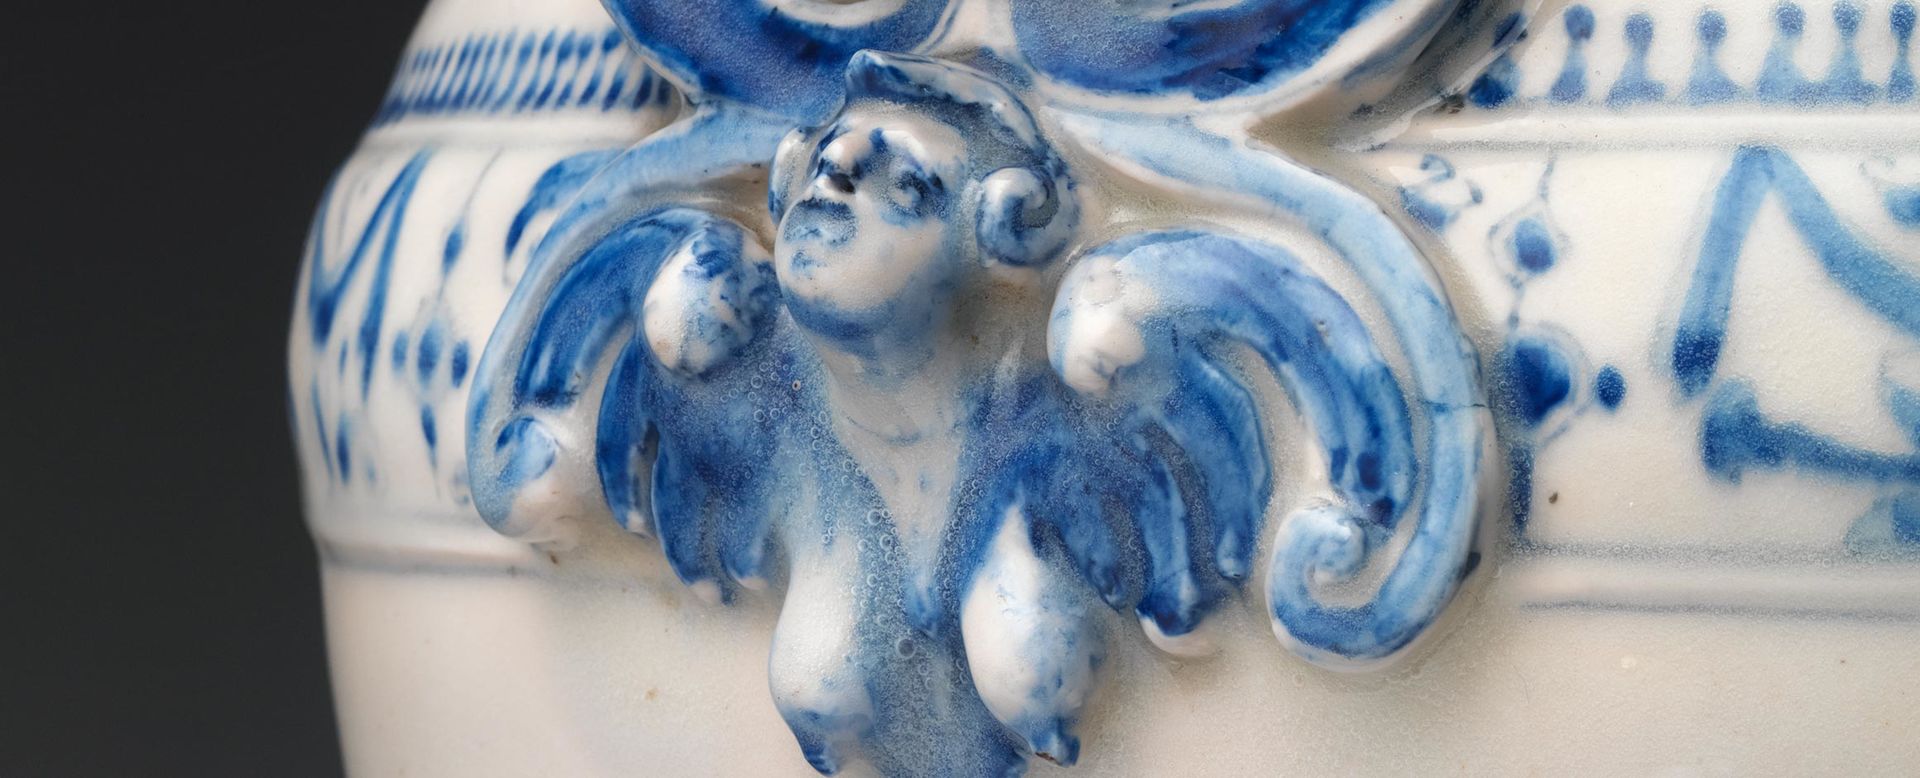 Detail of a blue and white handle from an Italian ewer made of porcelain